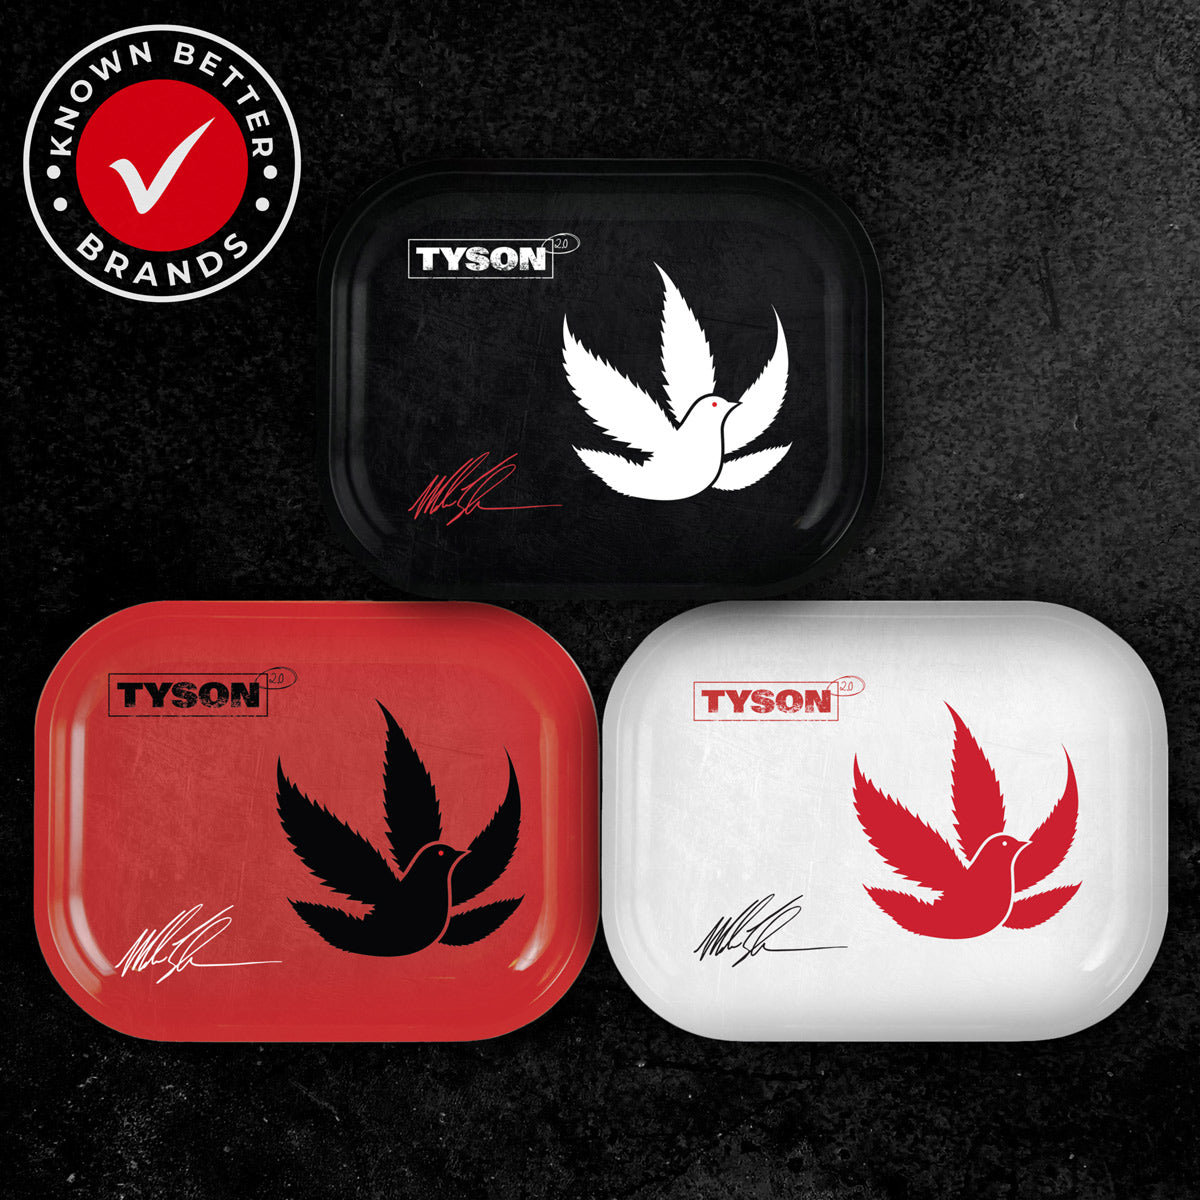 Pigeon Rolling Tray by TYSON 2.0 - Lightweight Aluminum Tribute to Iron Mike's Tranquil Smoke Sessions, Mike Tyson Rolling Tray with bird on it, Striking Design, Rolled Edges, Affordable and Official TYSON 2.0 Product - Multiple Sizes Available